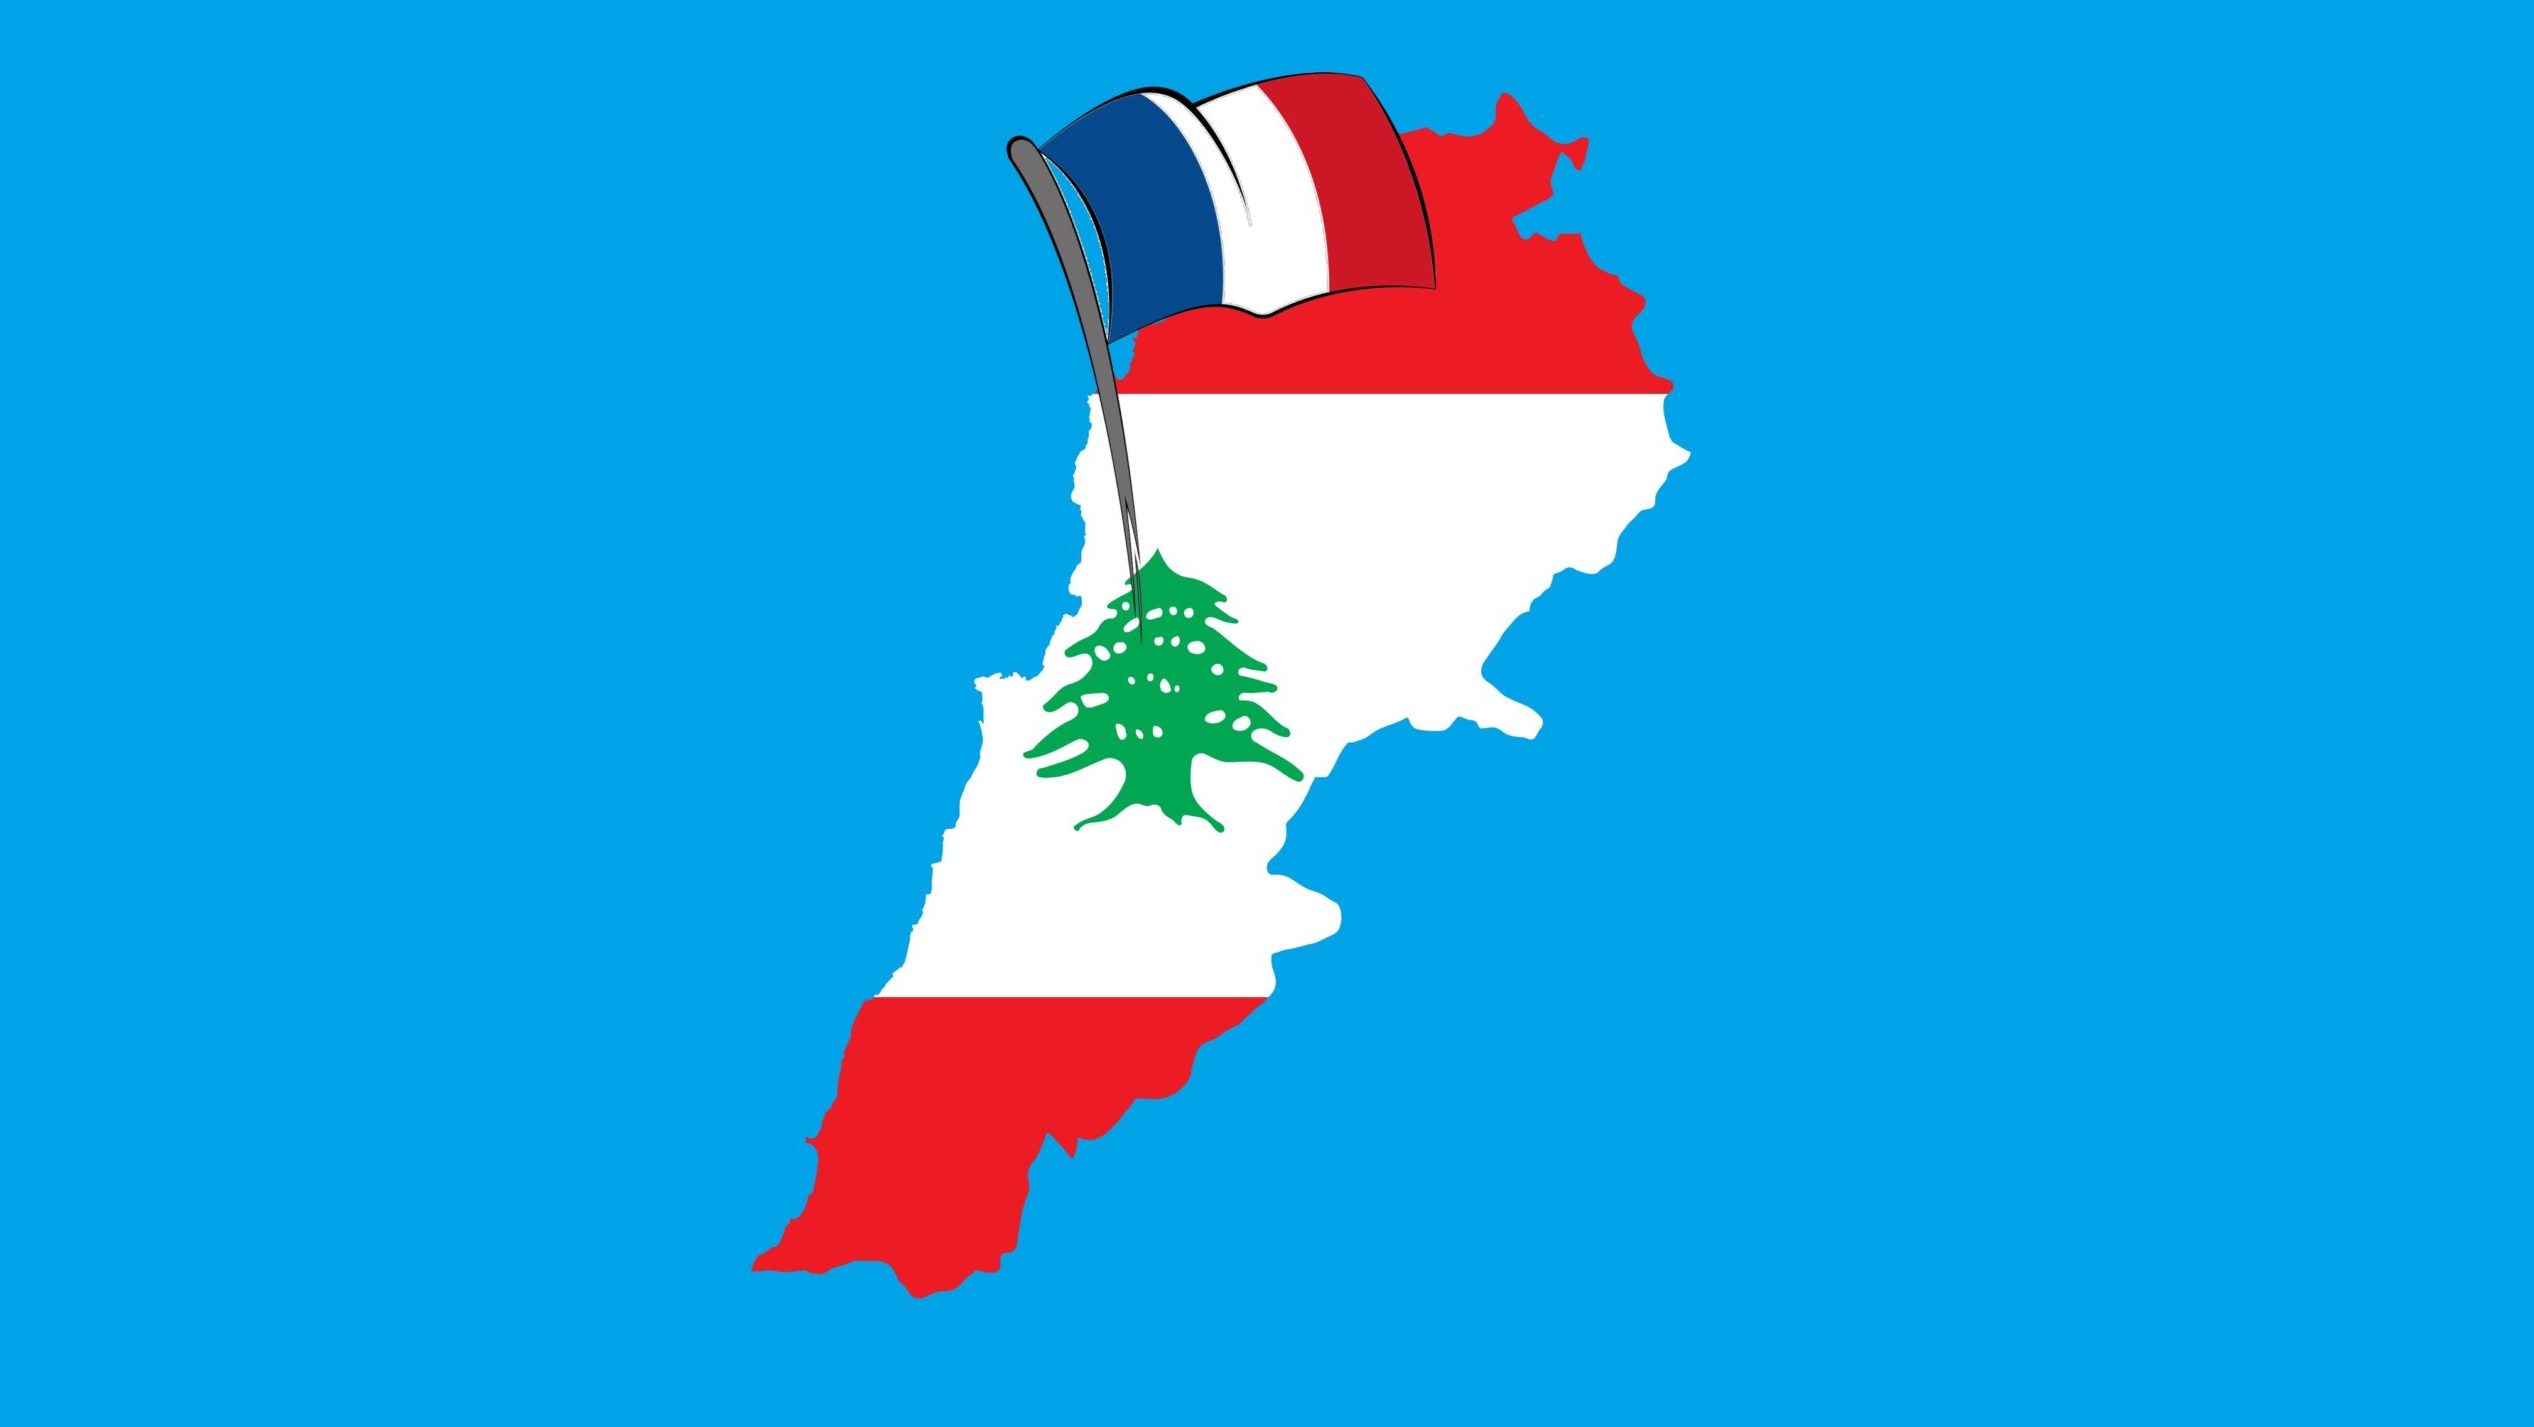 Lebanese Eager for French Leadership in Absence of Their Own - The Media Line